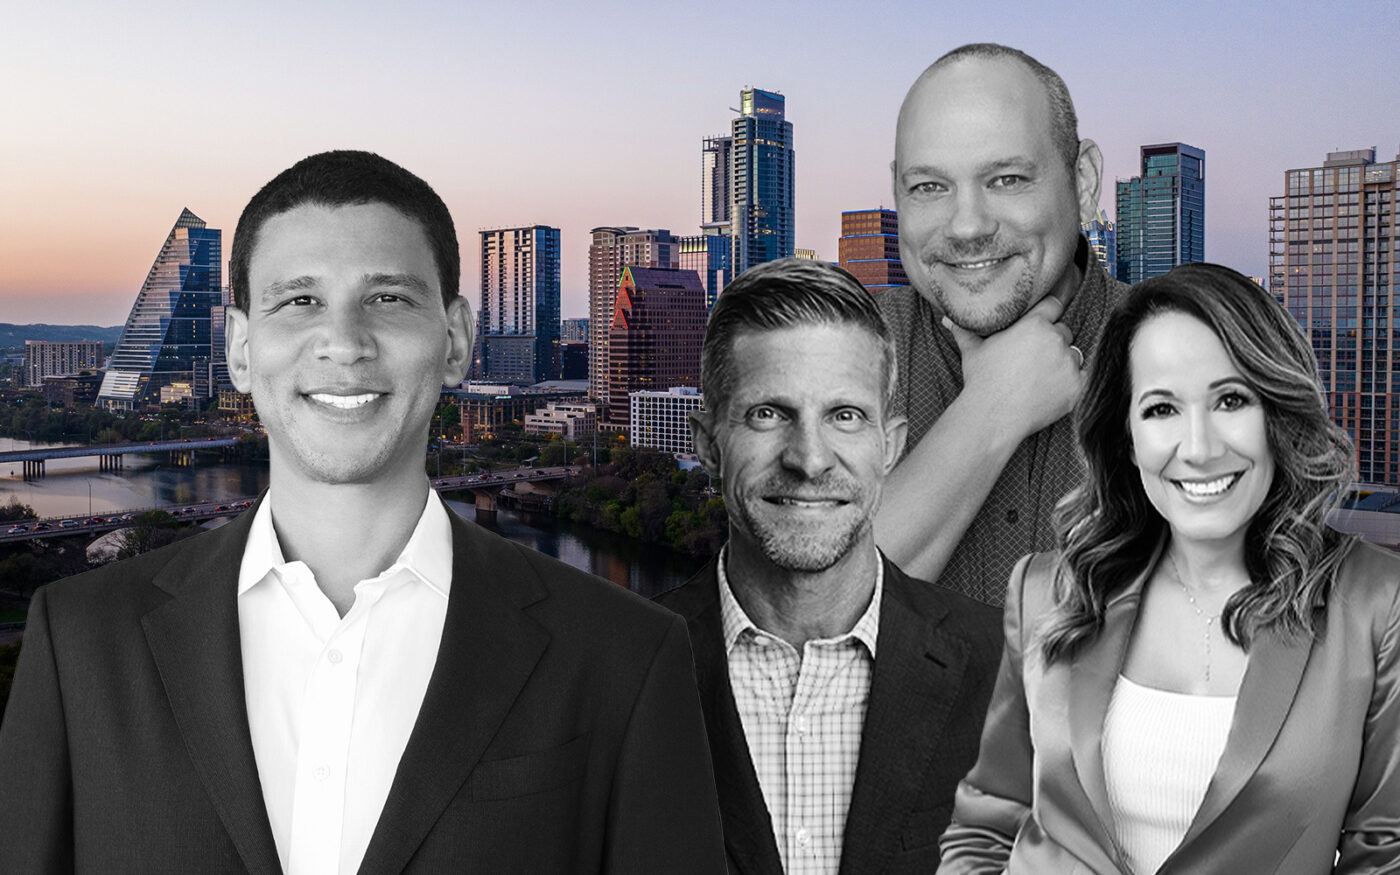 Compass' Robert Reffkin with Realty Austin's Jonathan Boatwright, Gabe Richter, and Yvette Flores (Realty Austin, Compass, Getty)